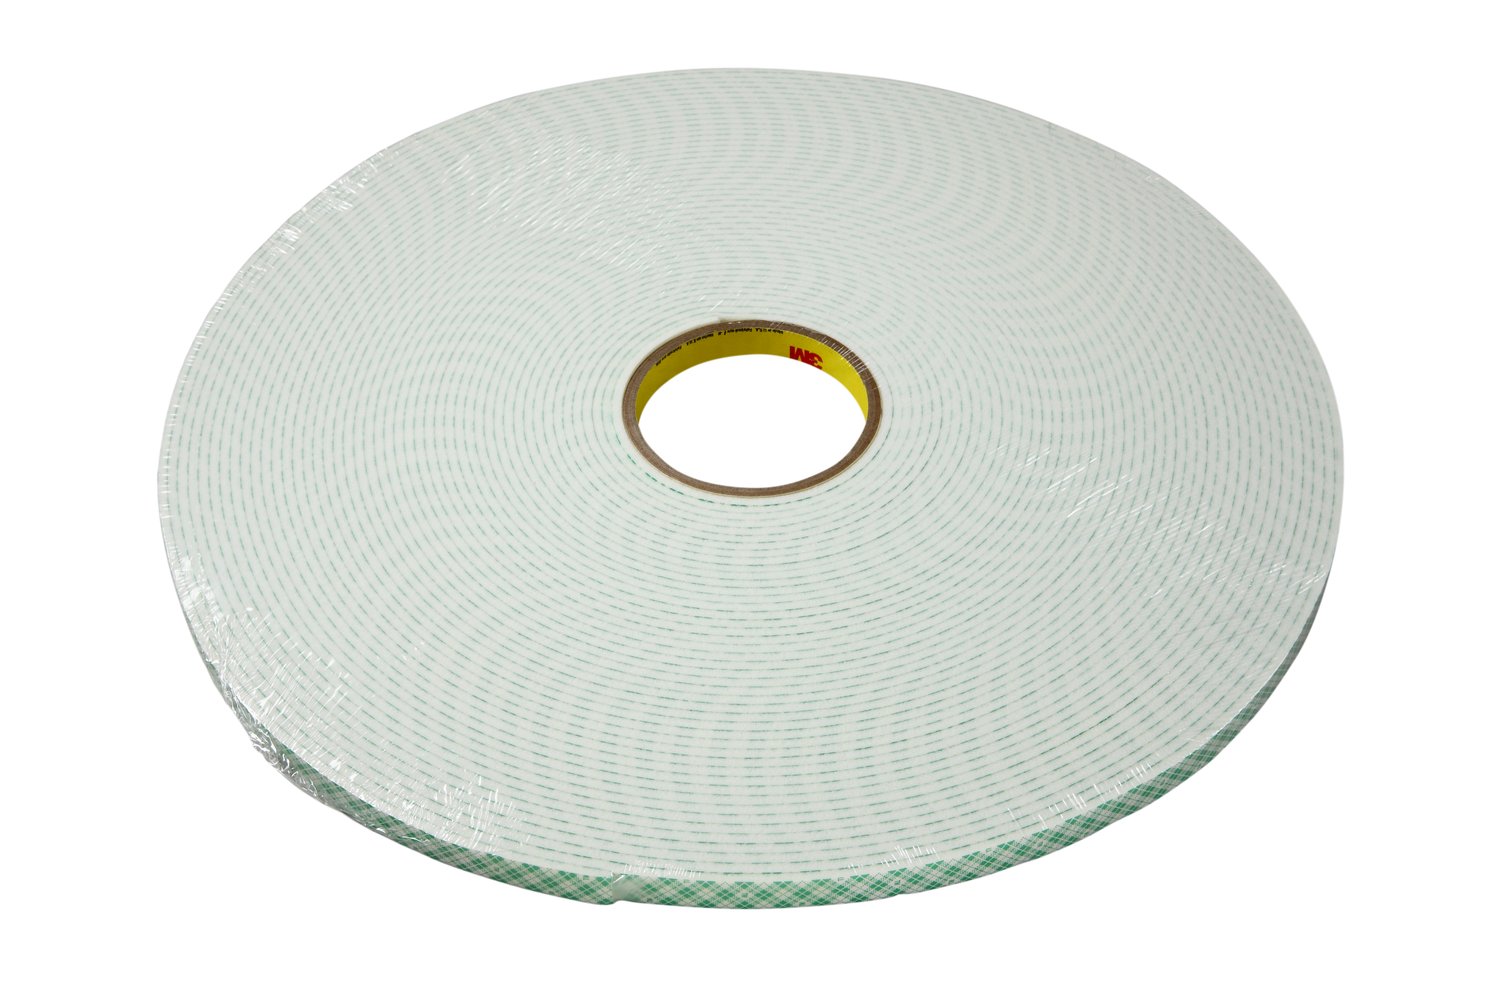 7000028665 - 3M Double Coated Urethane Foam Tape 4004, Off White, 3 in x 18 yd, 250
mil, 3 rolls per case